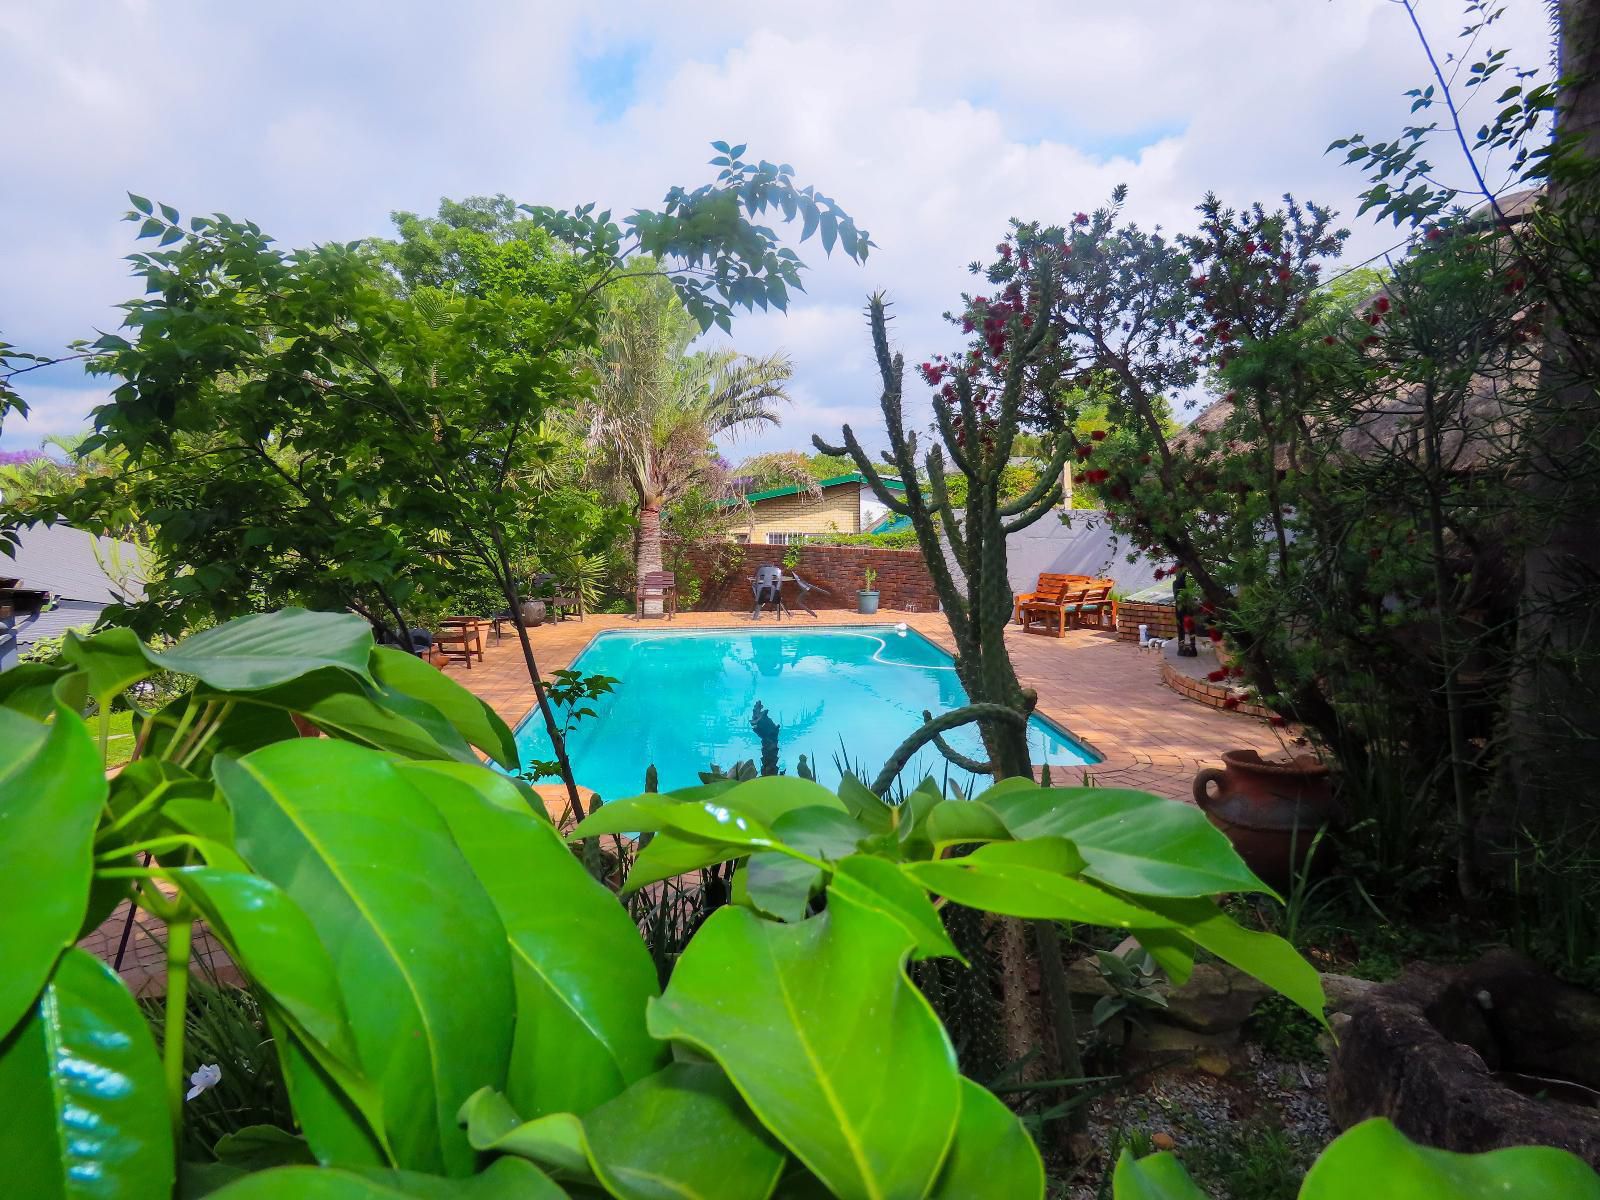 Casa Palmeira Sonheuwel Nelspruit Mpumalanga South Africa Complementary Colors, Palm Tree, Plant, Nature, Wood, Garden, Swimming Pool